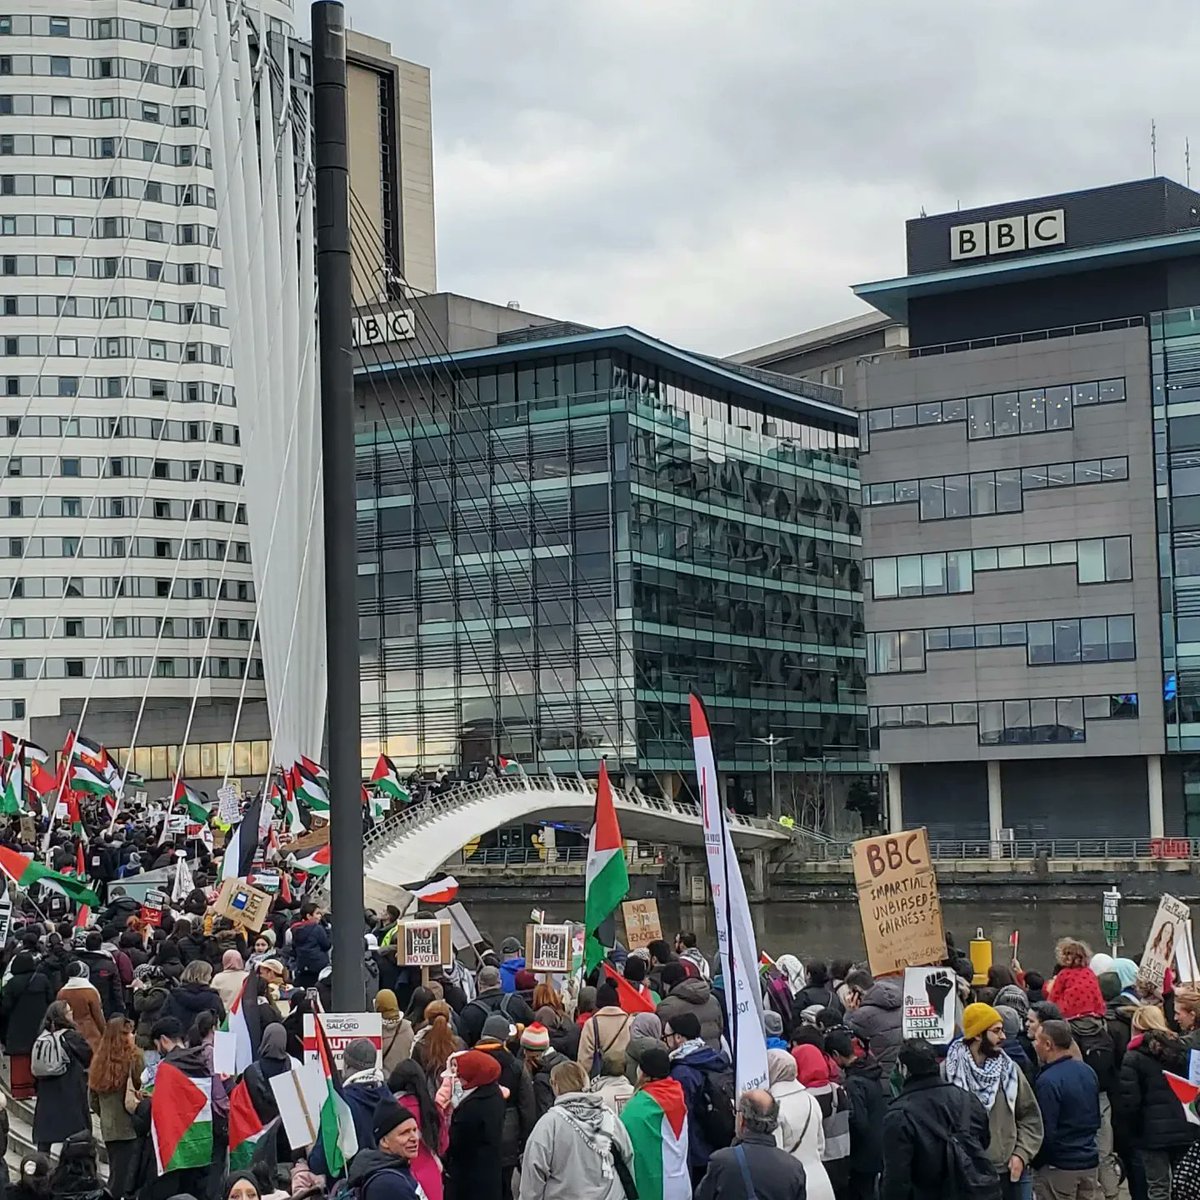 At BBC HQ, 1000's made it clear that when this many children in Gaza - 12000 - have been killed in the most awful ways imaginable, the Media's constant excusing of Israel's mass slaughter and destruction has given them the cover to commit genocide.
#ShameonBBC
#StopGazaGenocide